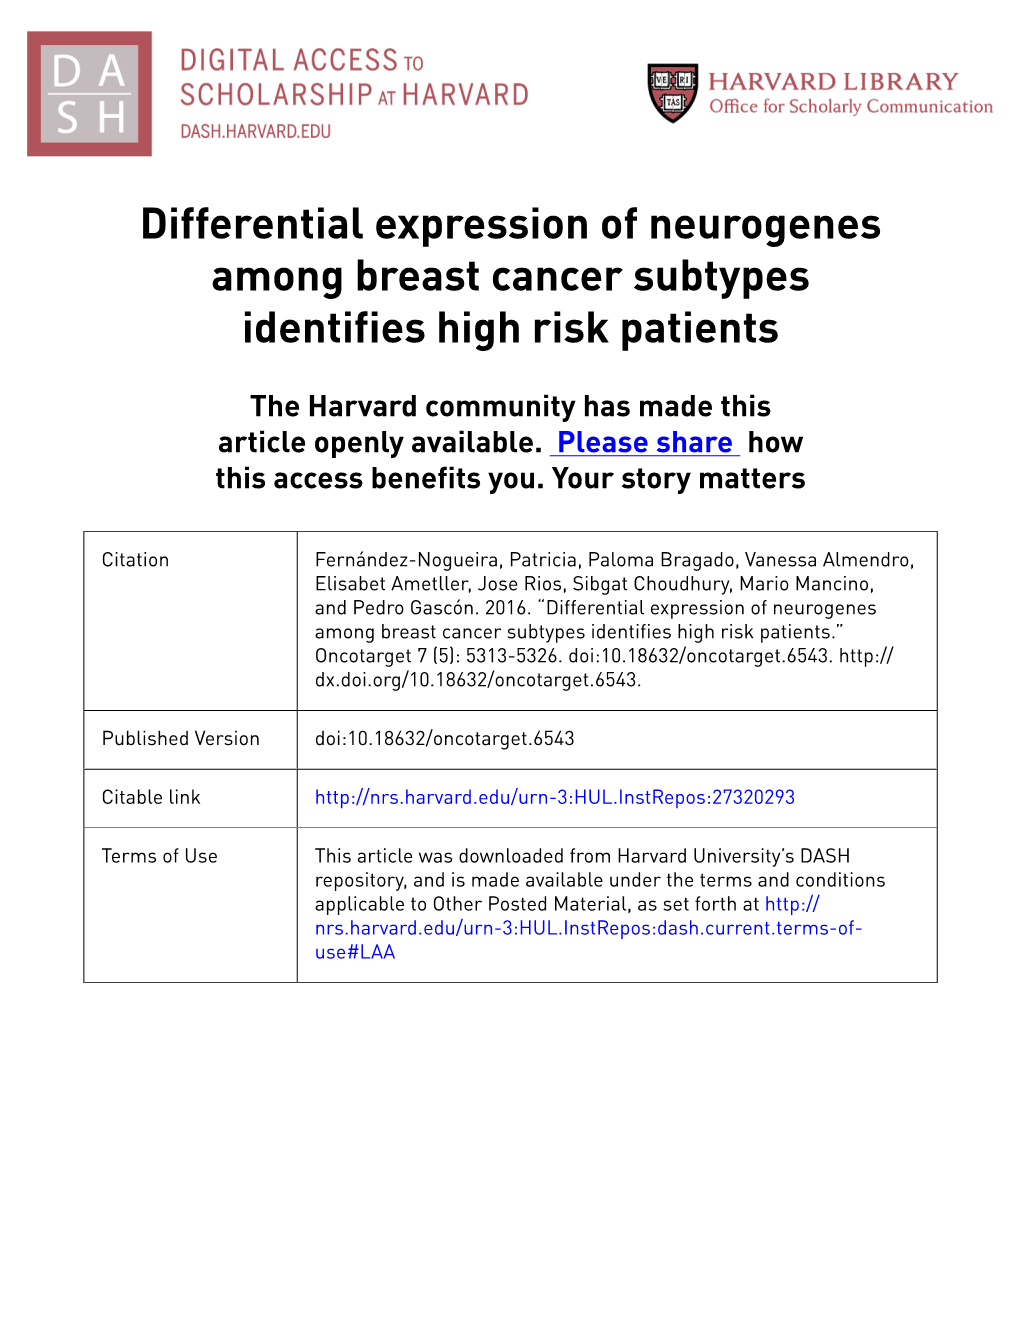 Differential Expression of Neurogenes Among Breast Cancer Subtypes Identifies High Risk Patients